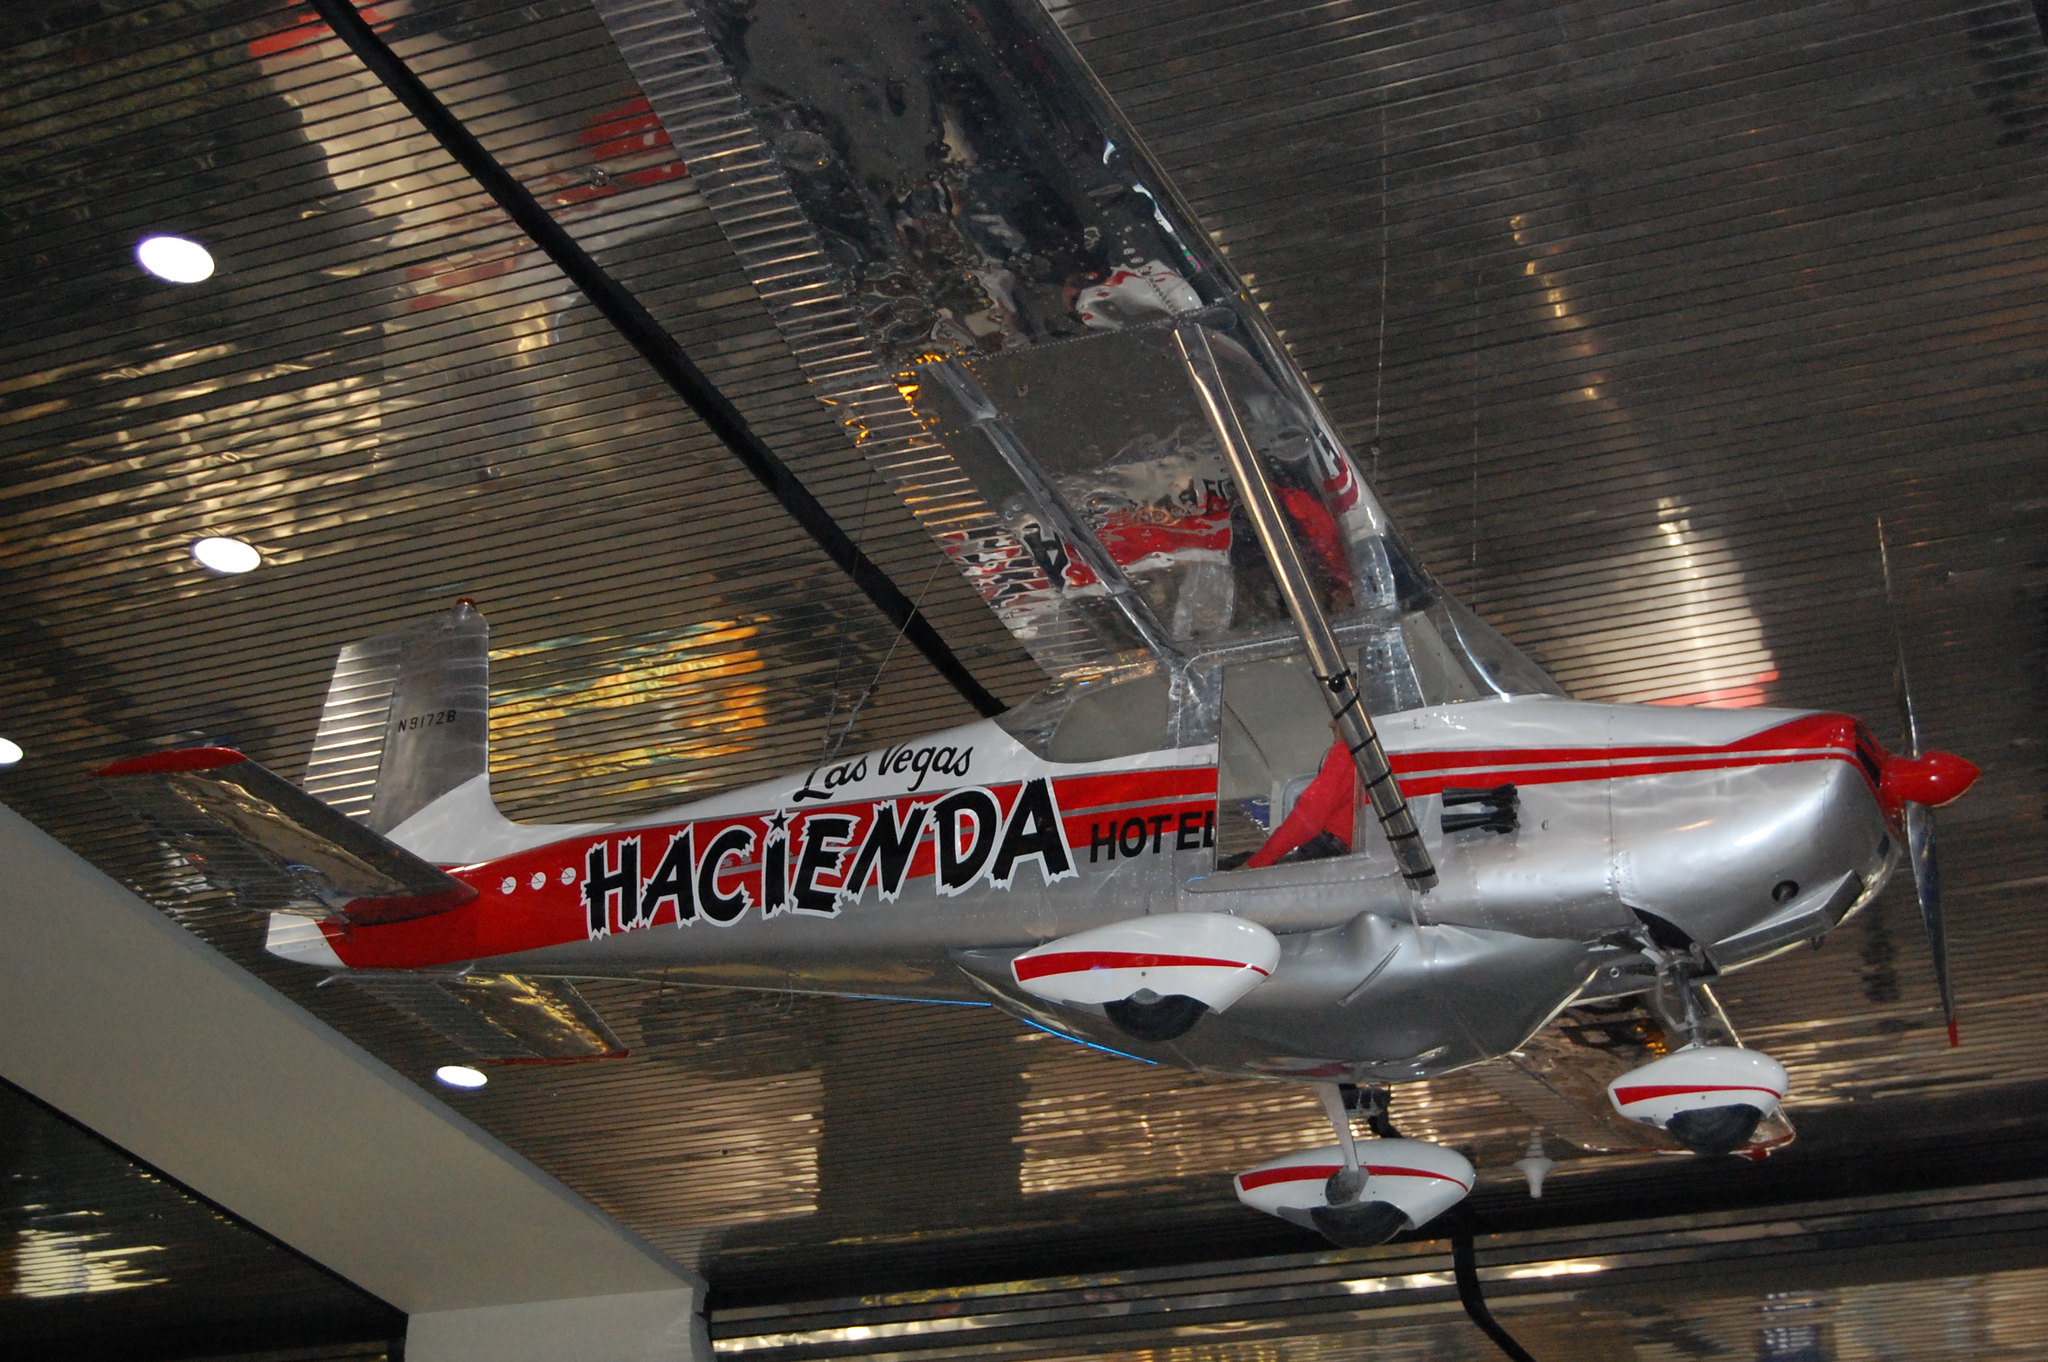 Timm and Cook's Cessna 172 aircraft is on display in the passenger terminal at McCarran International Airport in Las Vegas.